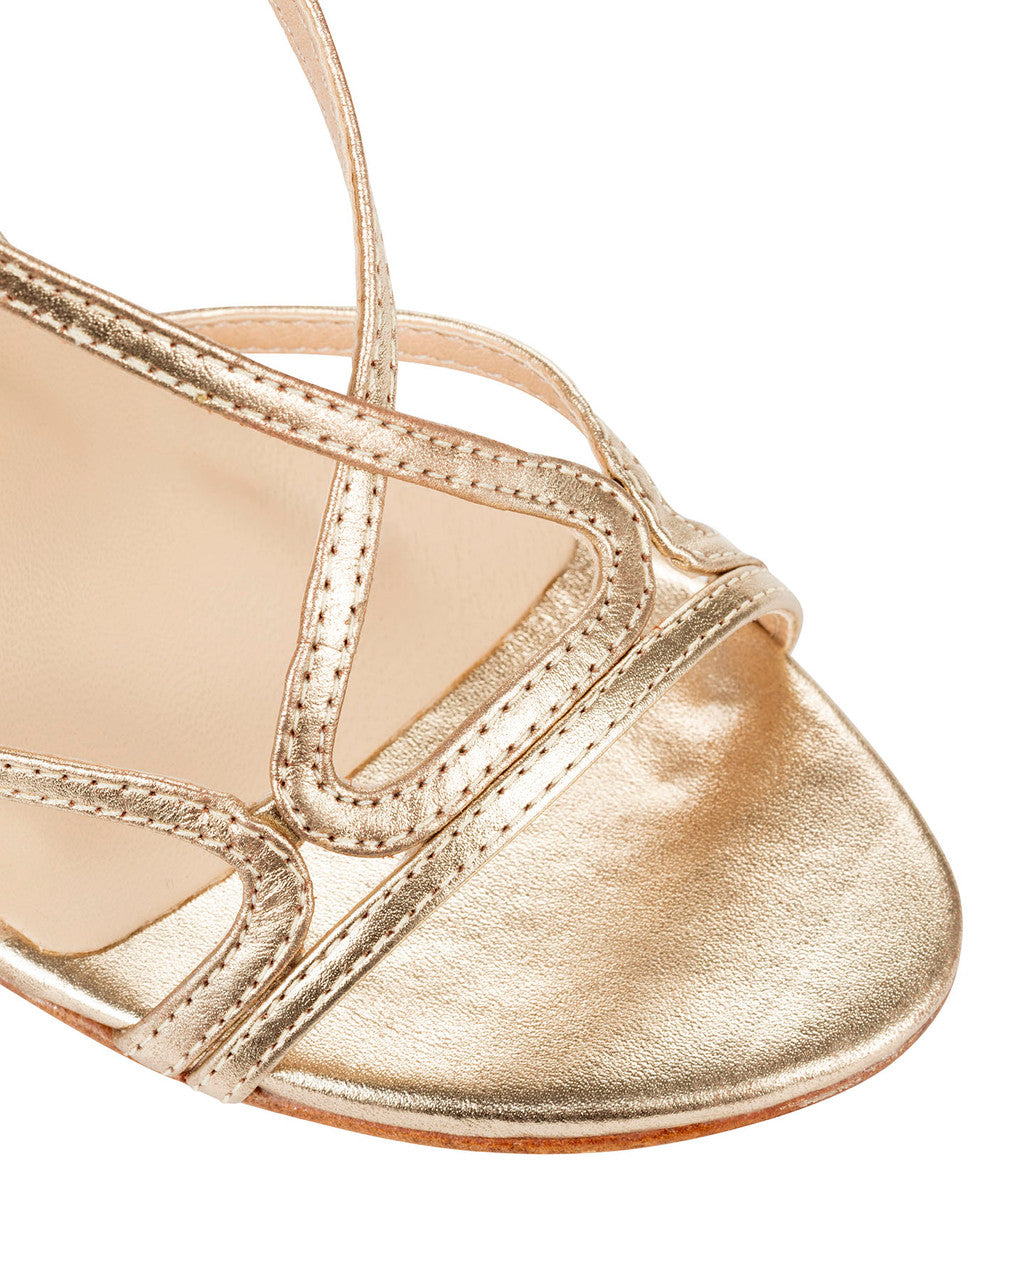 Dolci Firme Cassia Champagne Sandal